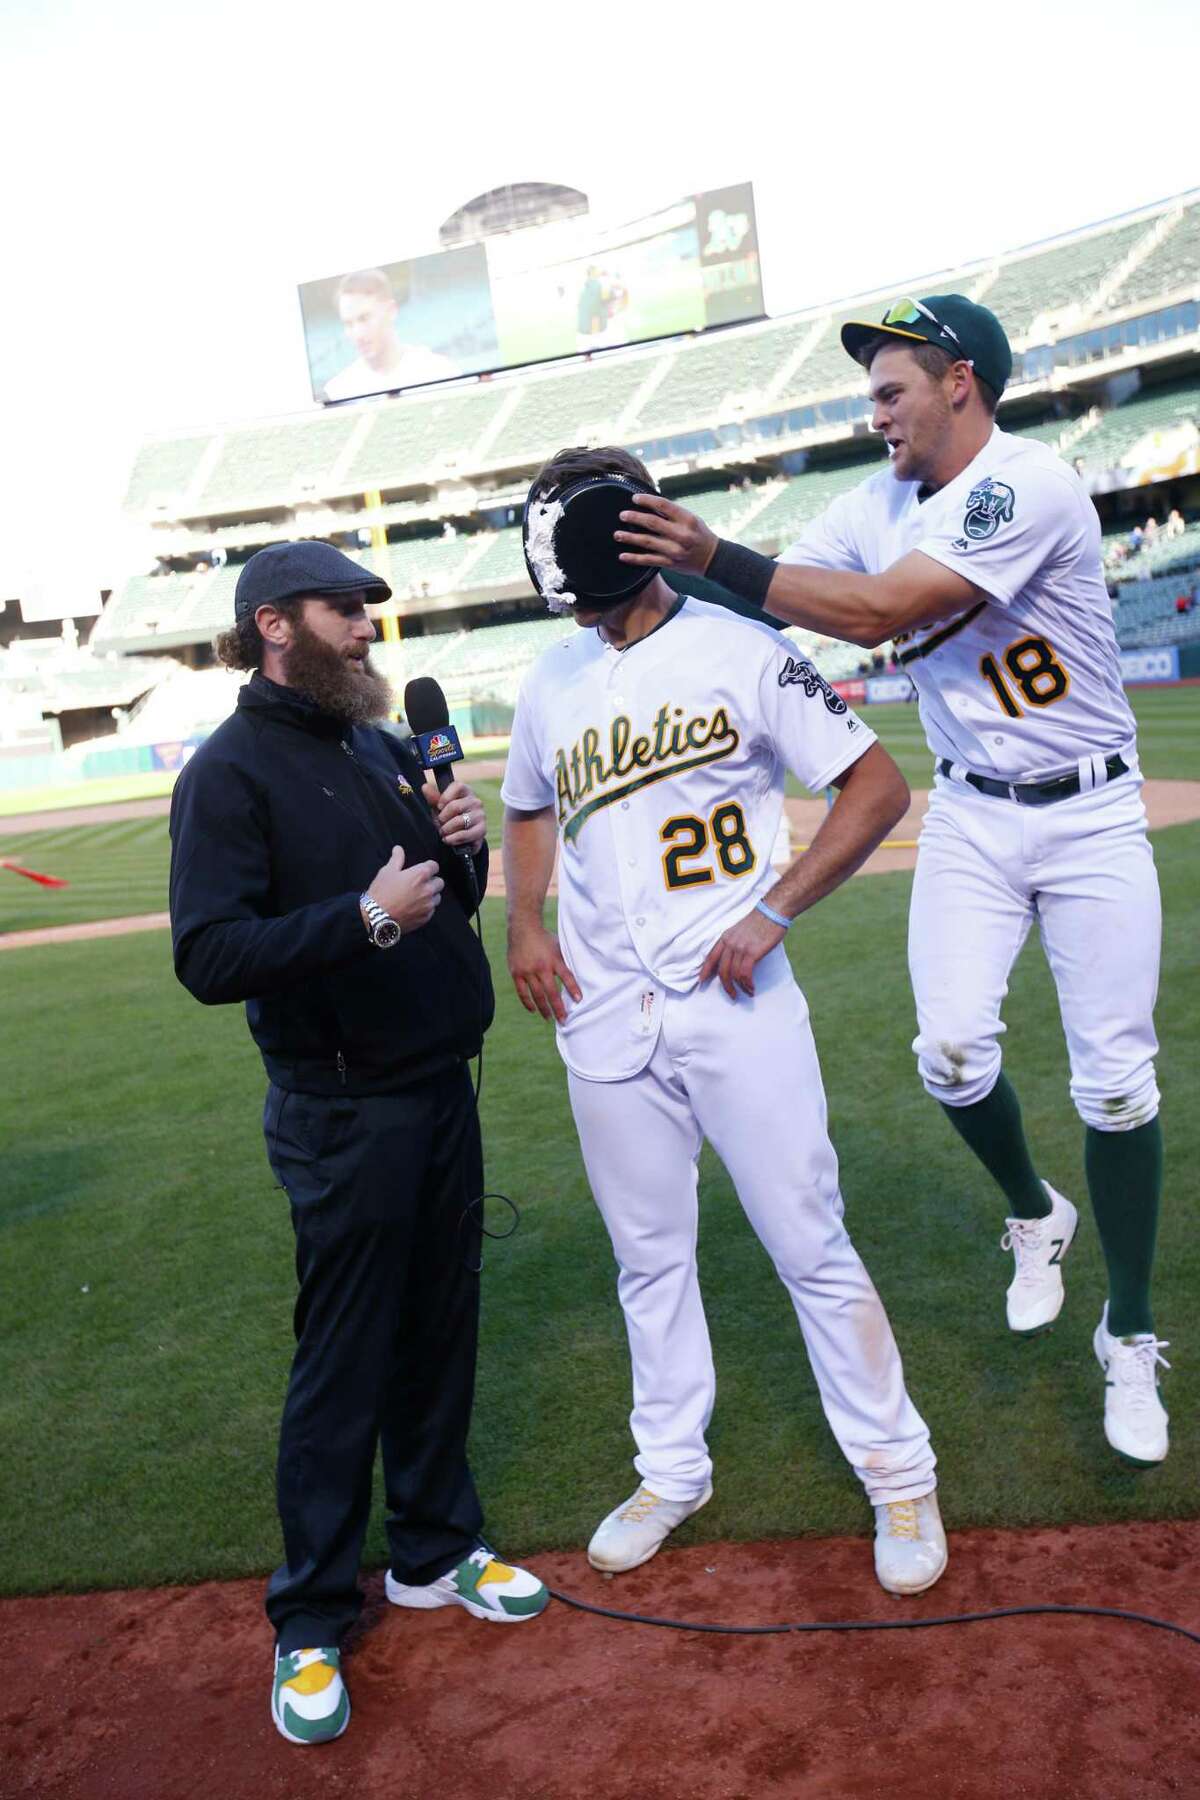 OAKLAND, CA - APRIL 18: Matt Olson #28 of the Oakland Athletics gets pied by Chad Pinder #18, while being interviewed by NBC Sports California Analyst Dallas Braden, after hitting a walkoff single following the game against the Chicago White Sox at the Oakland Alameda Coliseum on April 18, 2018 in Oakland, California. The Athletics defeated the White Sox 12-11. (Photo by Michael Zagaris/Oakland Athletics/Getty Images) *** Local Caption *** Matt Olson;Chad Pinder;Dallas Braden